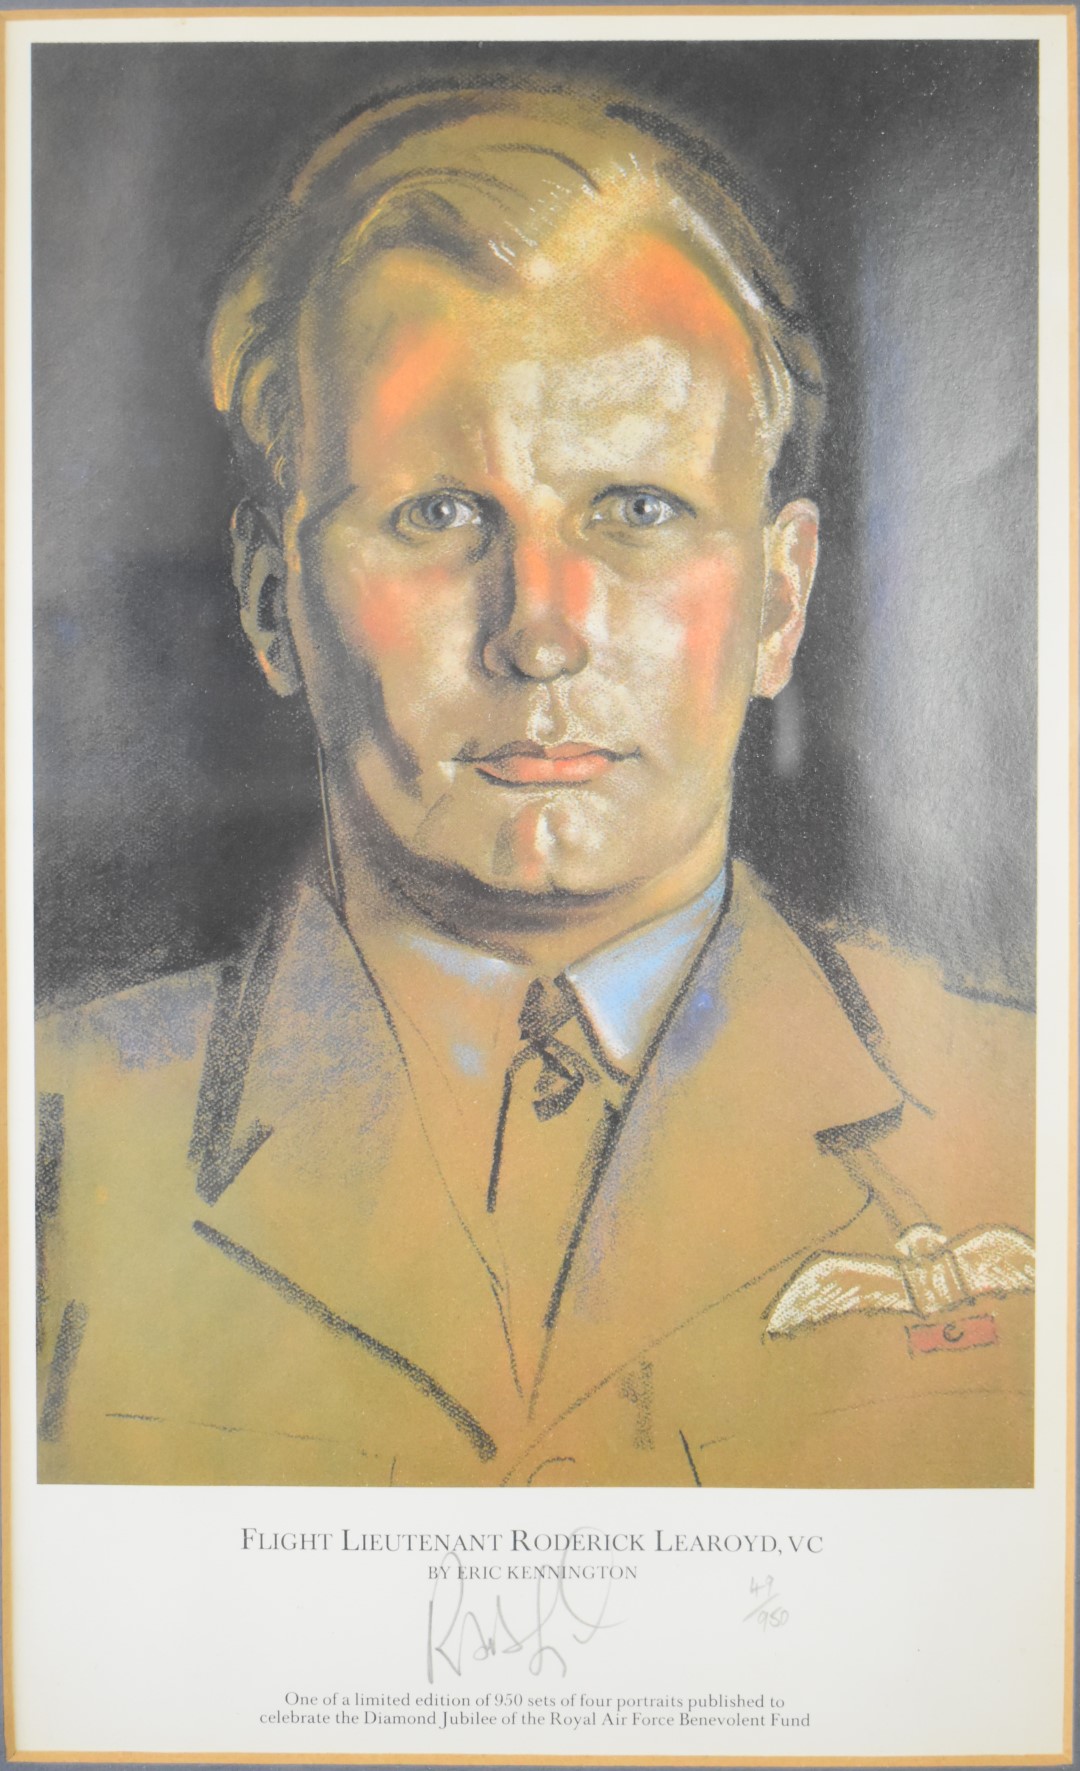 Four limited edition WW2 Royal Air Force portraits by Erick Kennington all signed by subjects, - Image 4 of 10